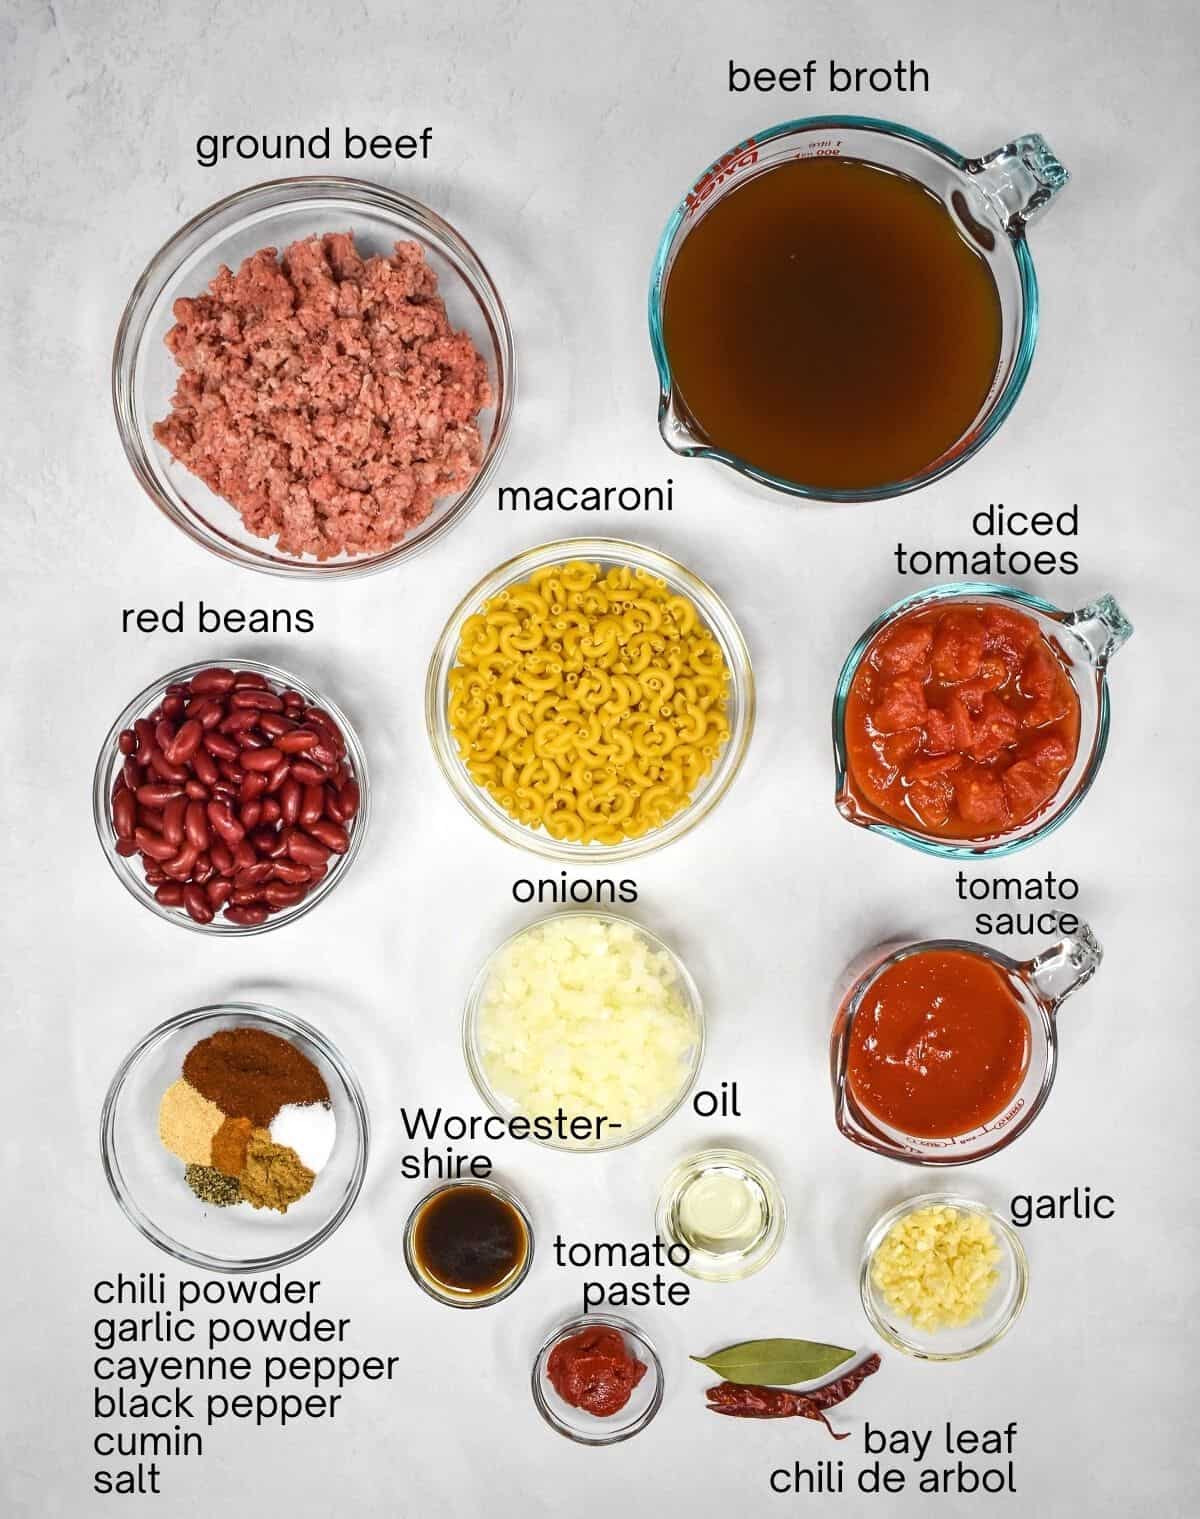 The prepped ingredients for the easy chili mac arrange in glass bowls on a white table. Each ingredient is labeled with small black letters.